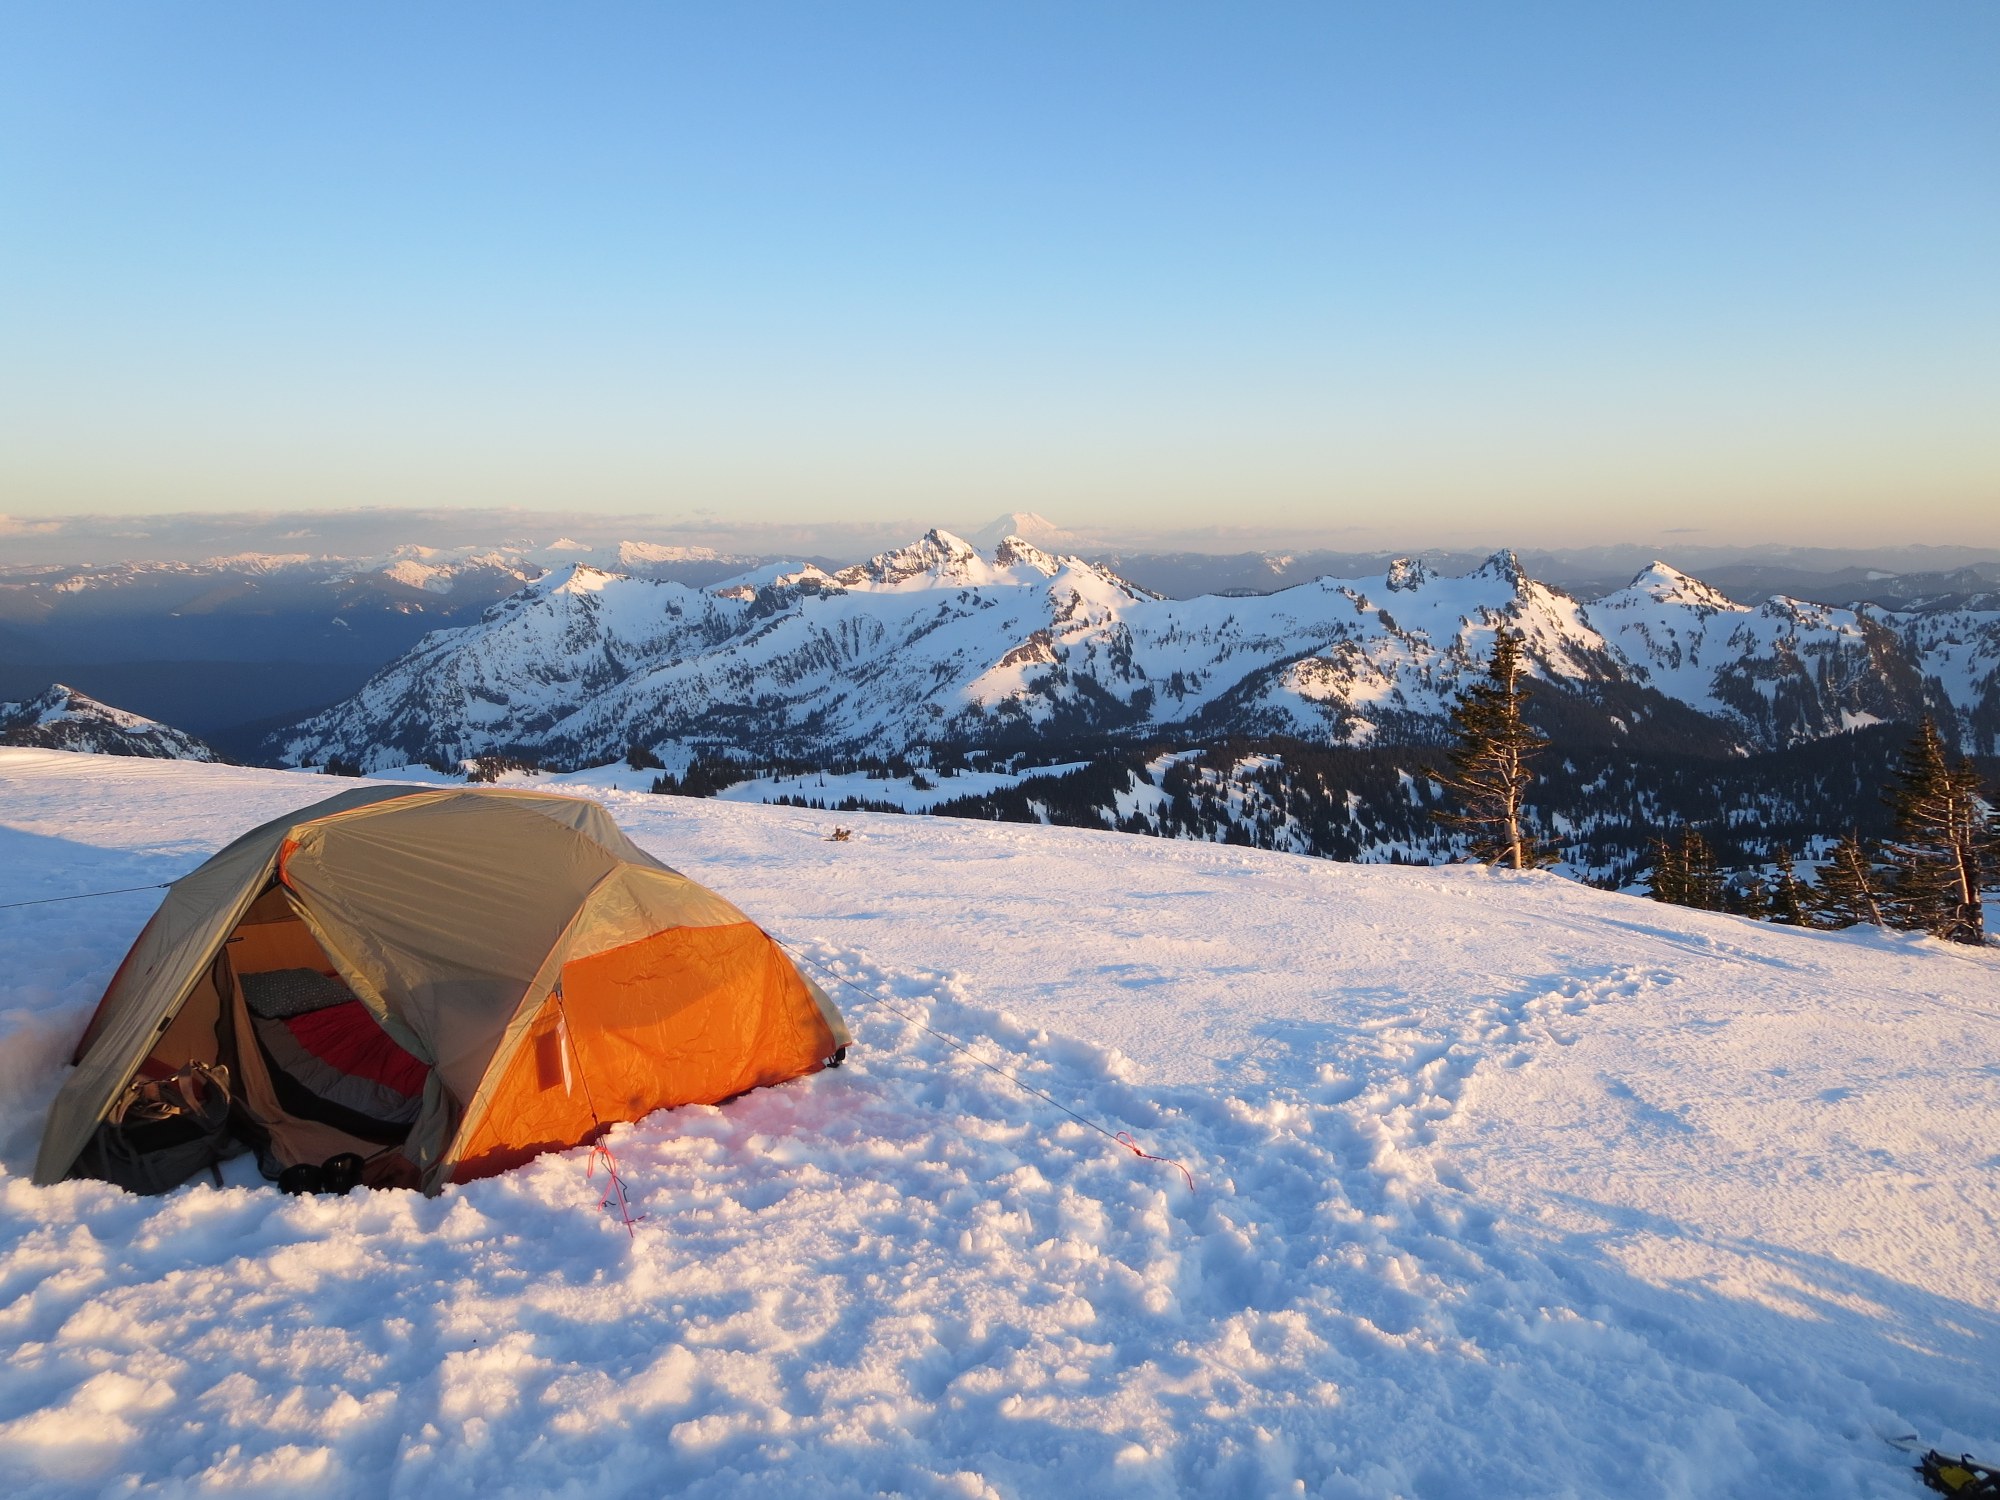 https://www.mountaineers.org/blog/snow-camping-101-an-ode-to-the-cold/@@images/image